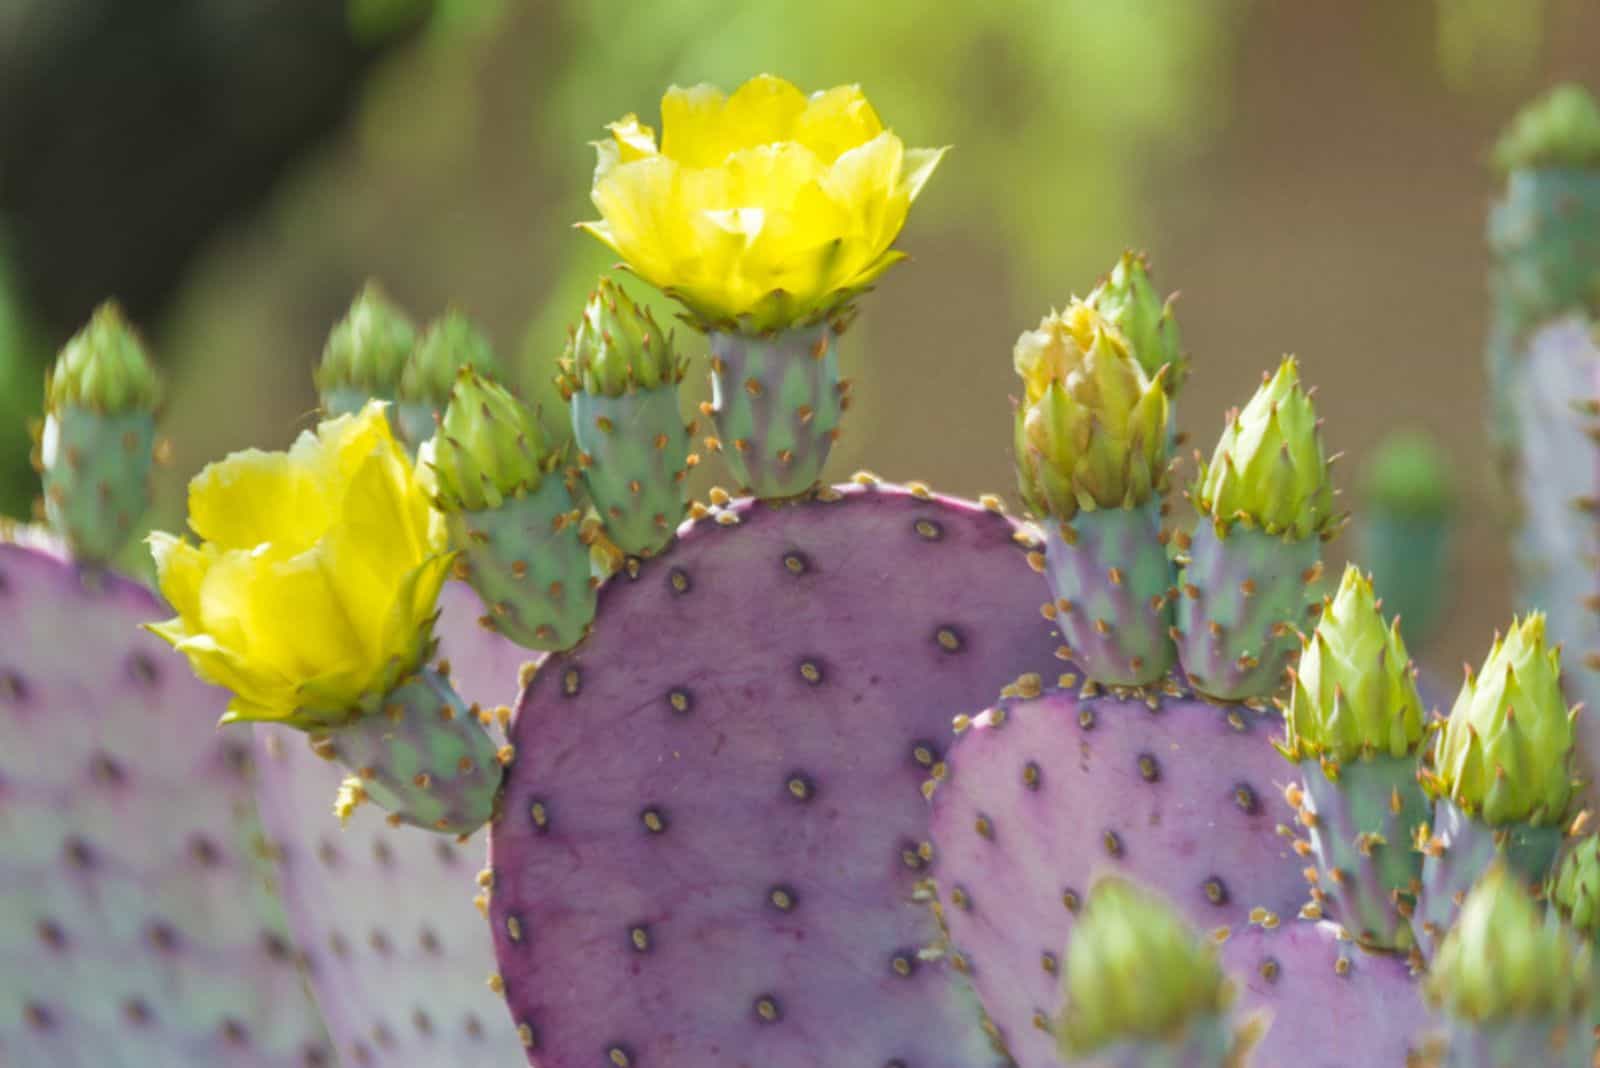 Prickly Pear Cactus with yellow flowers